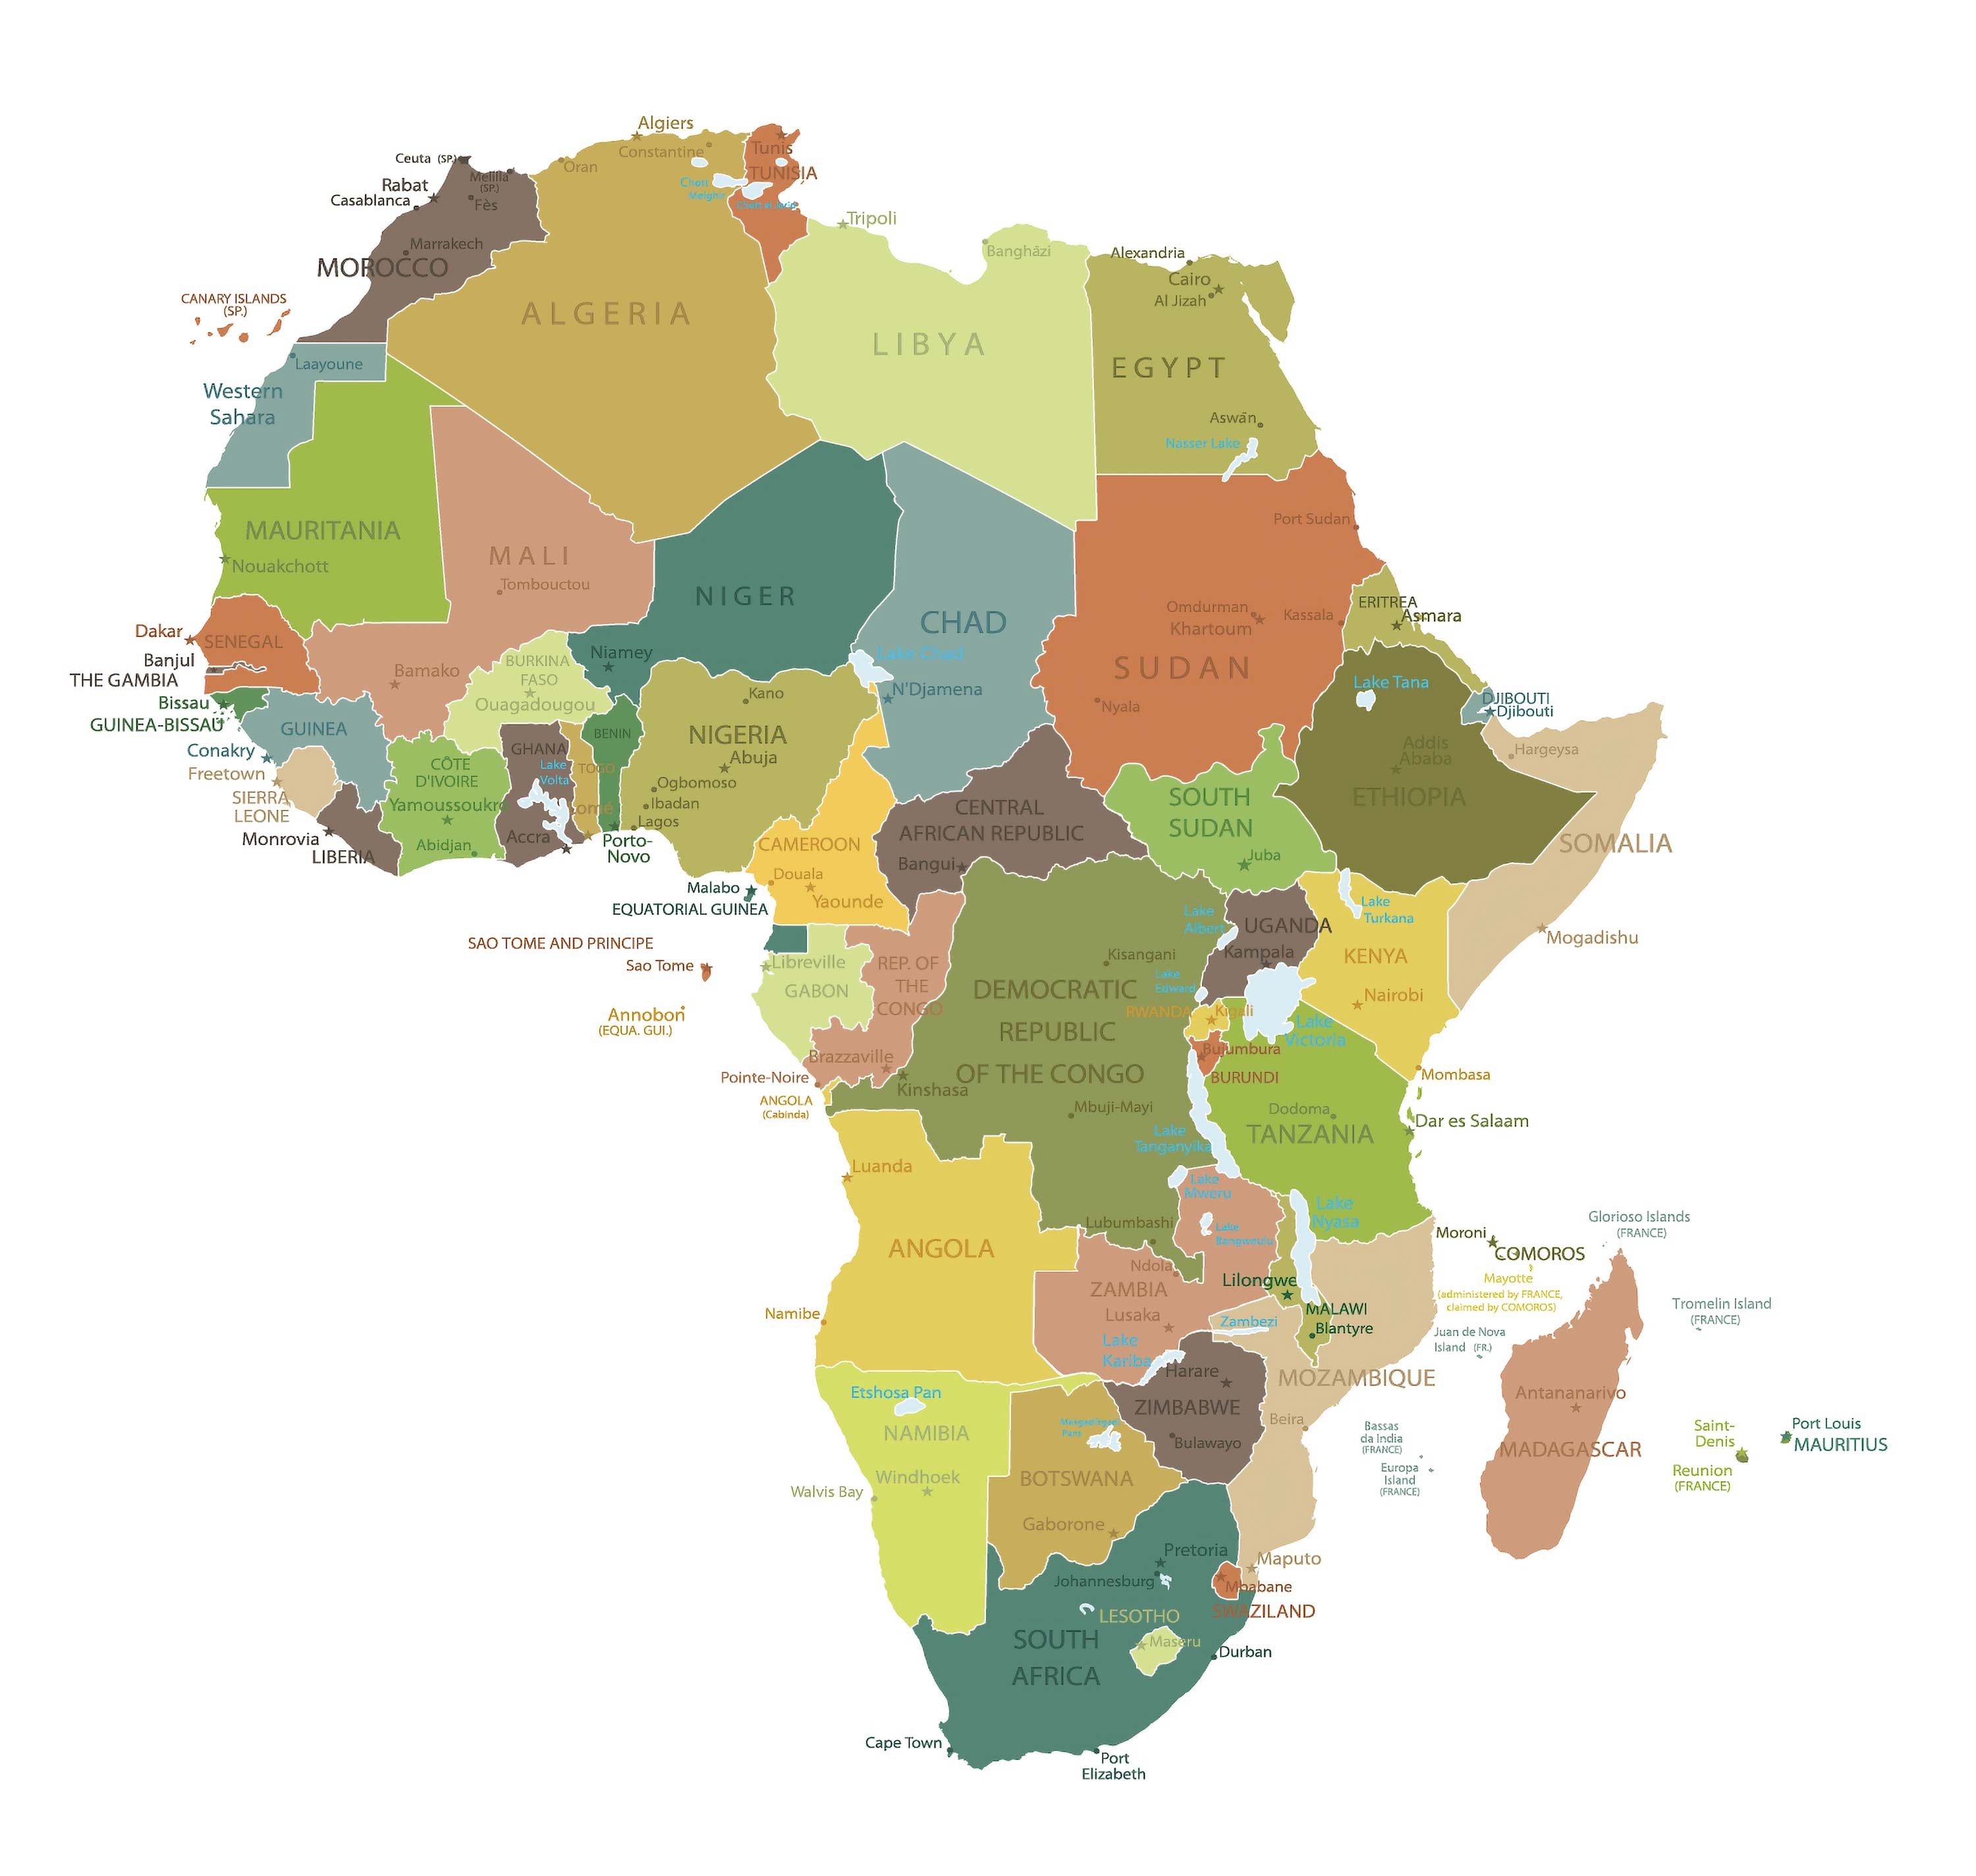 Countries, Capitals and Major Cities of the Africa Map